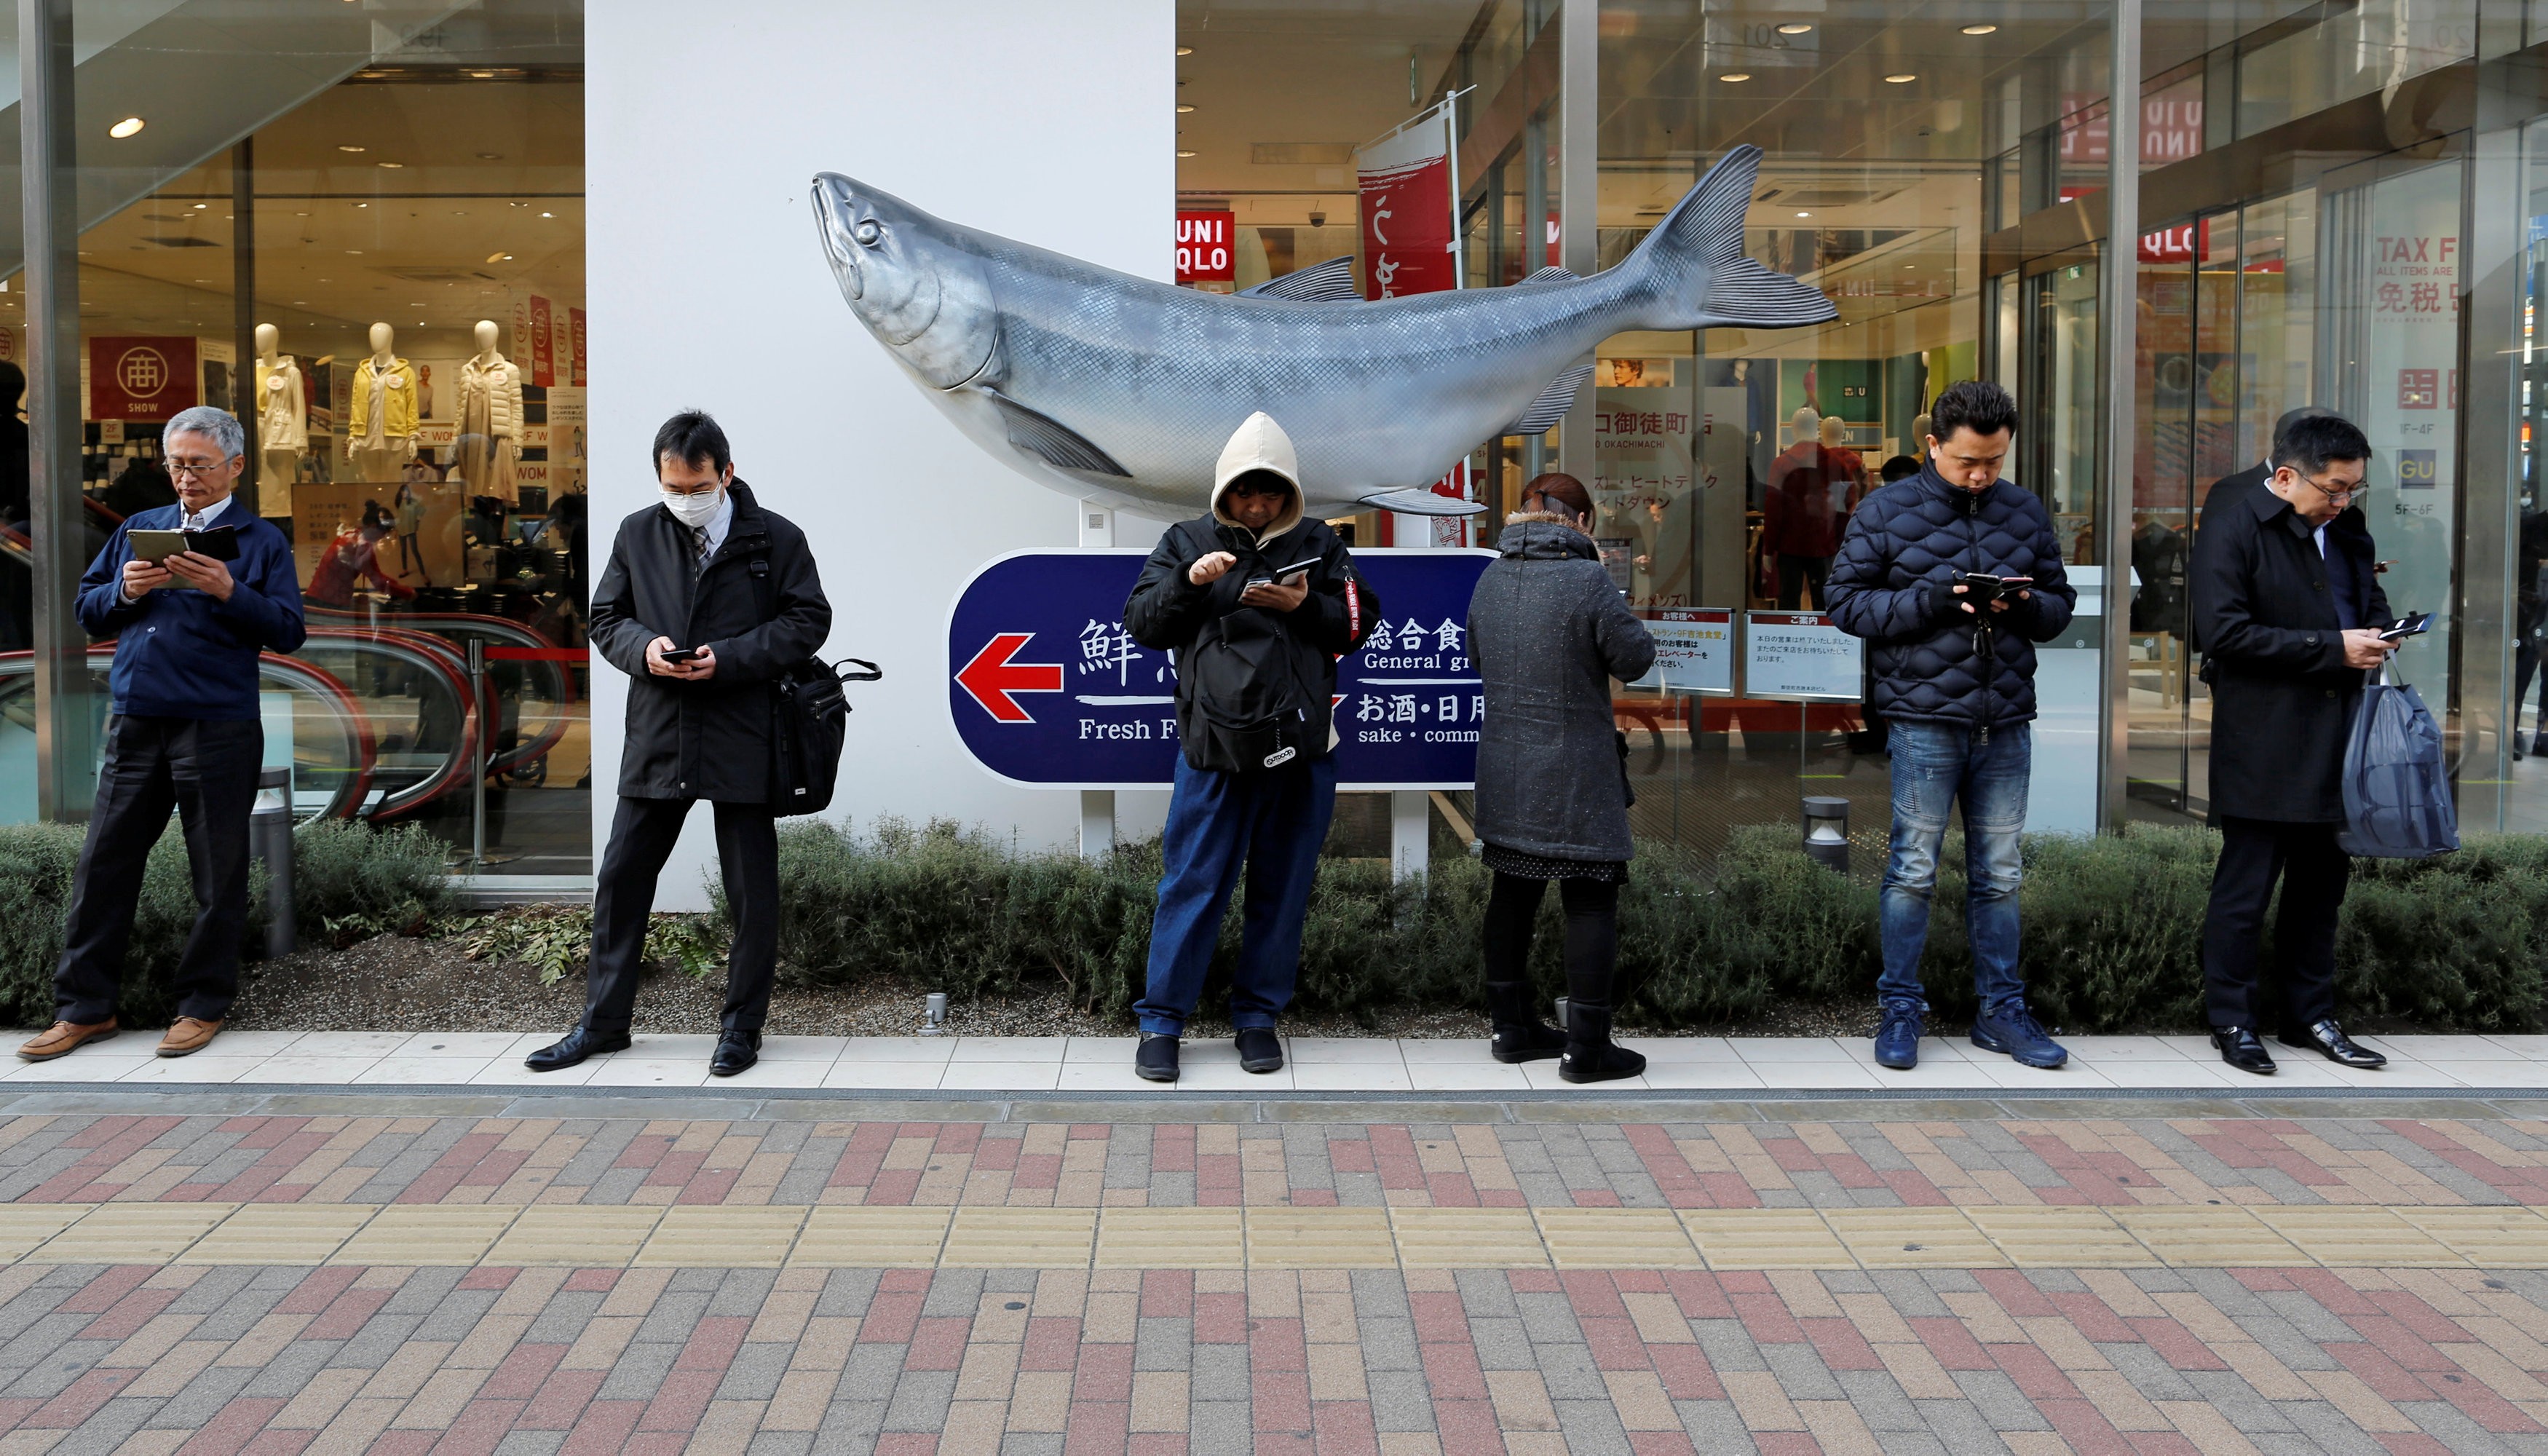 People use their smartphones on a street in Tokyo. Photo: Reuters